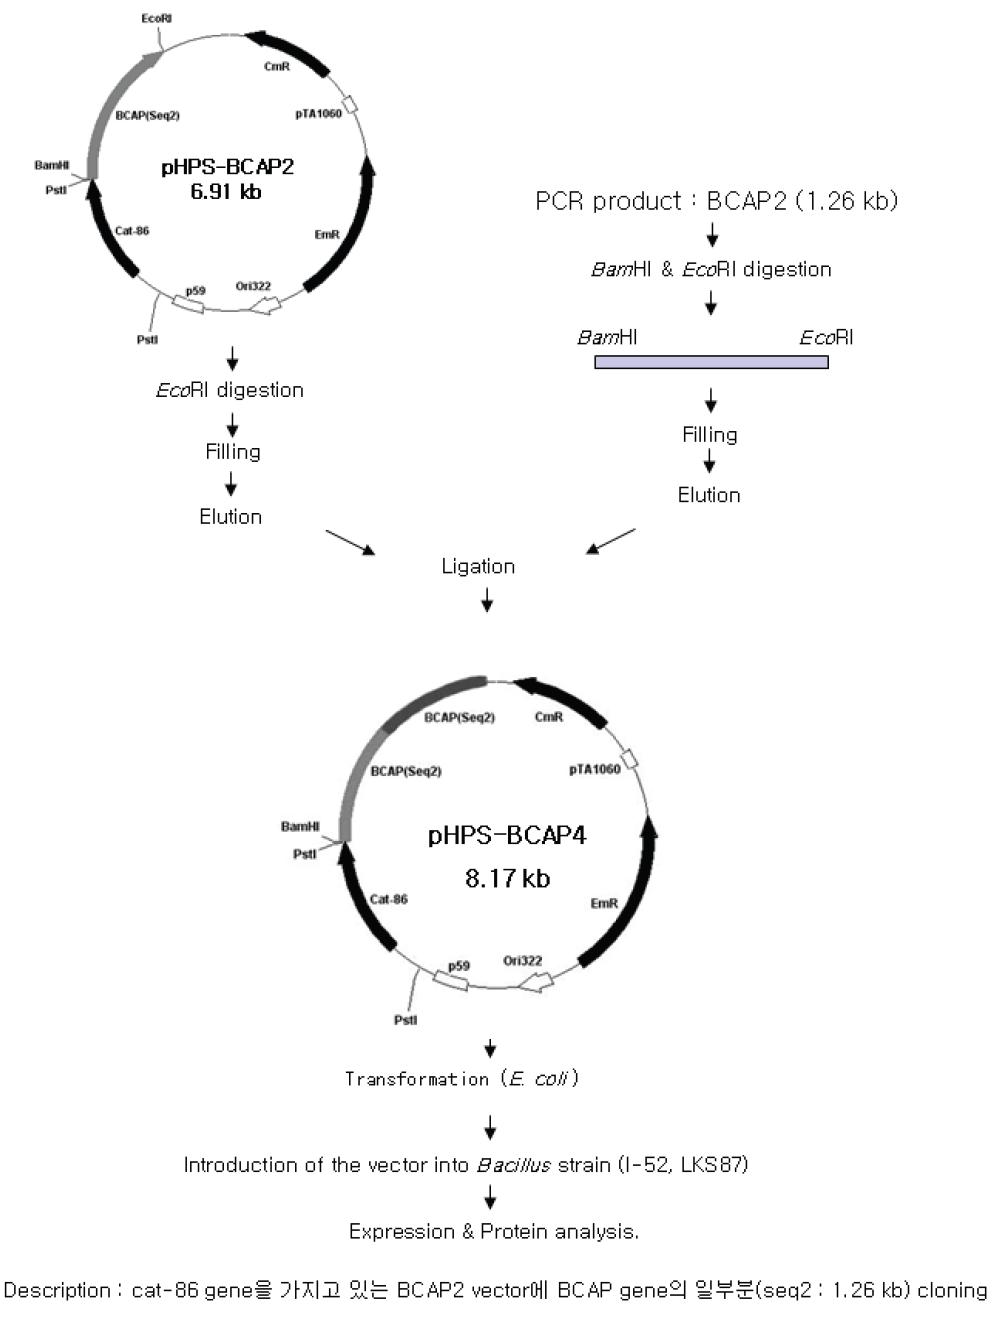 Construction of the pHPS-BCAP4 by insertion of BCAP2 gene in pHPS-BCAP2 vector.